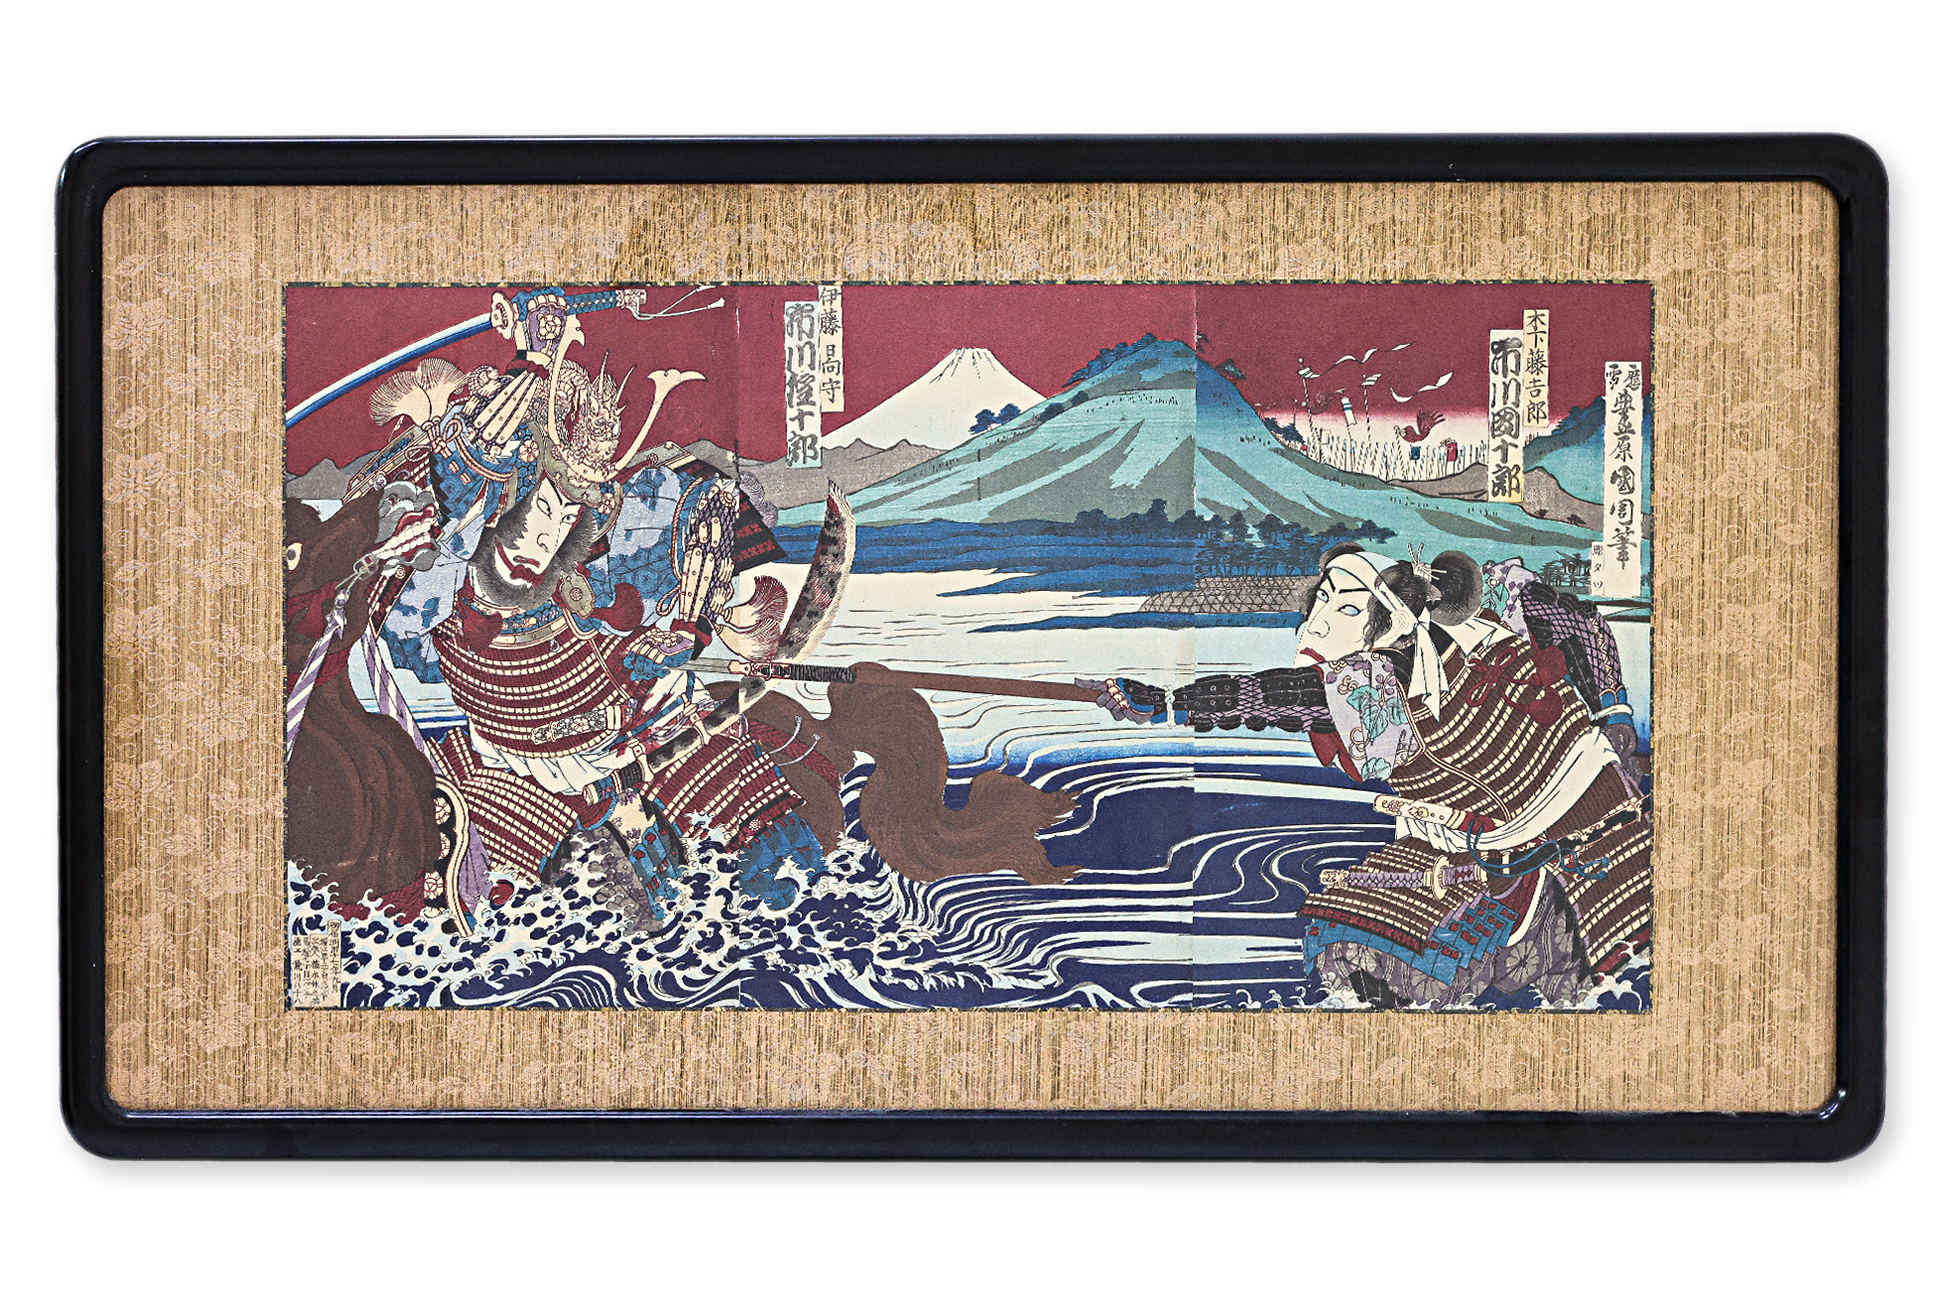 A JAPANESE TRIPTYCH WOODBLOCK PRINT